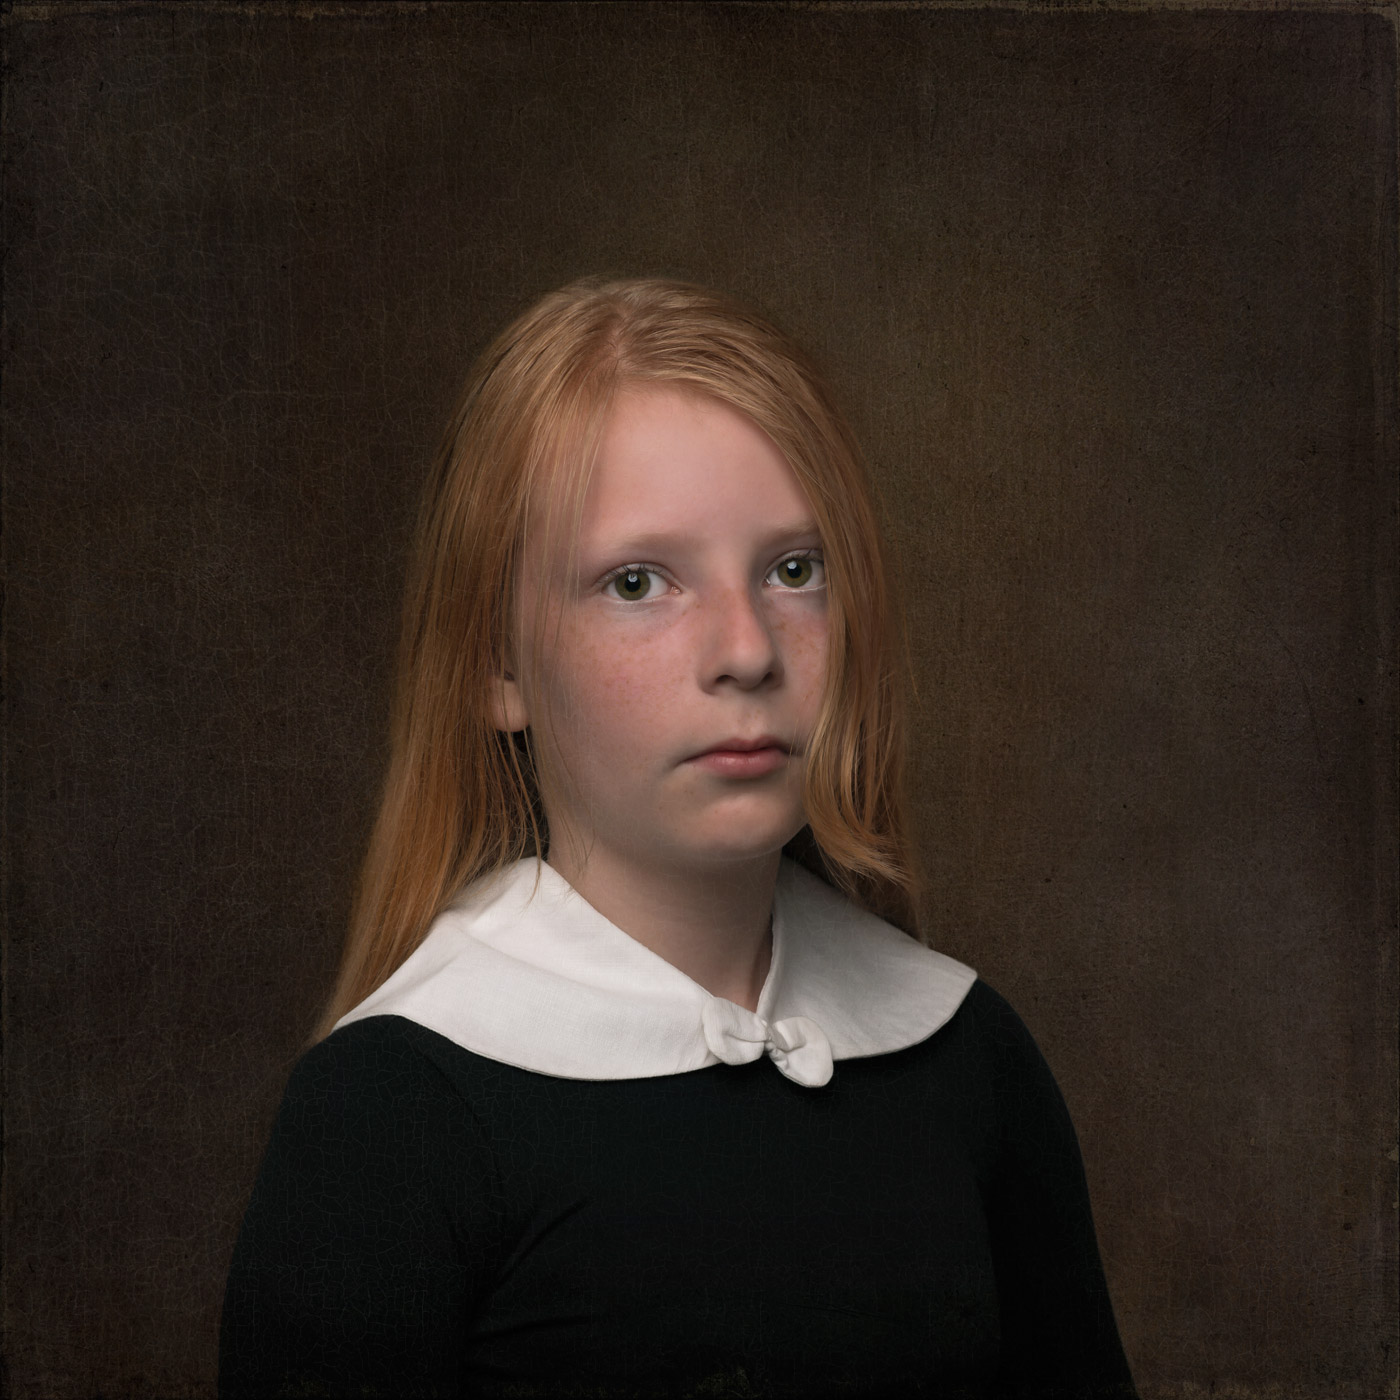 portrait photography fine art photography lace collars old dutch masters